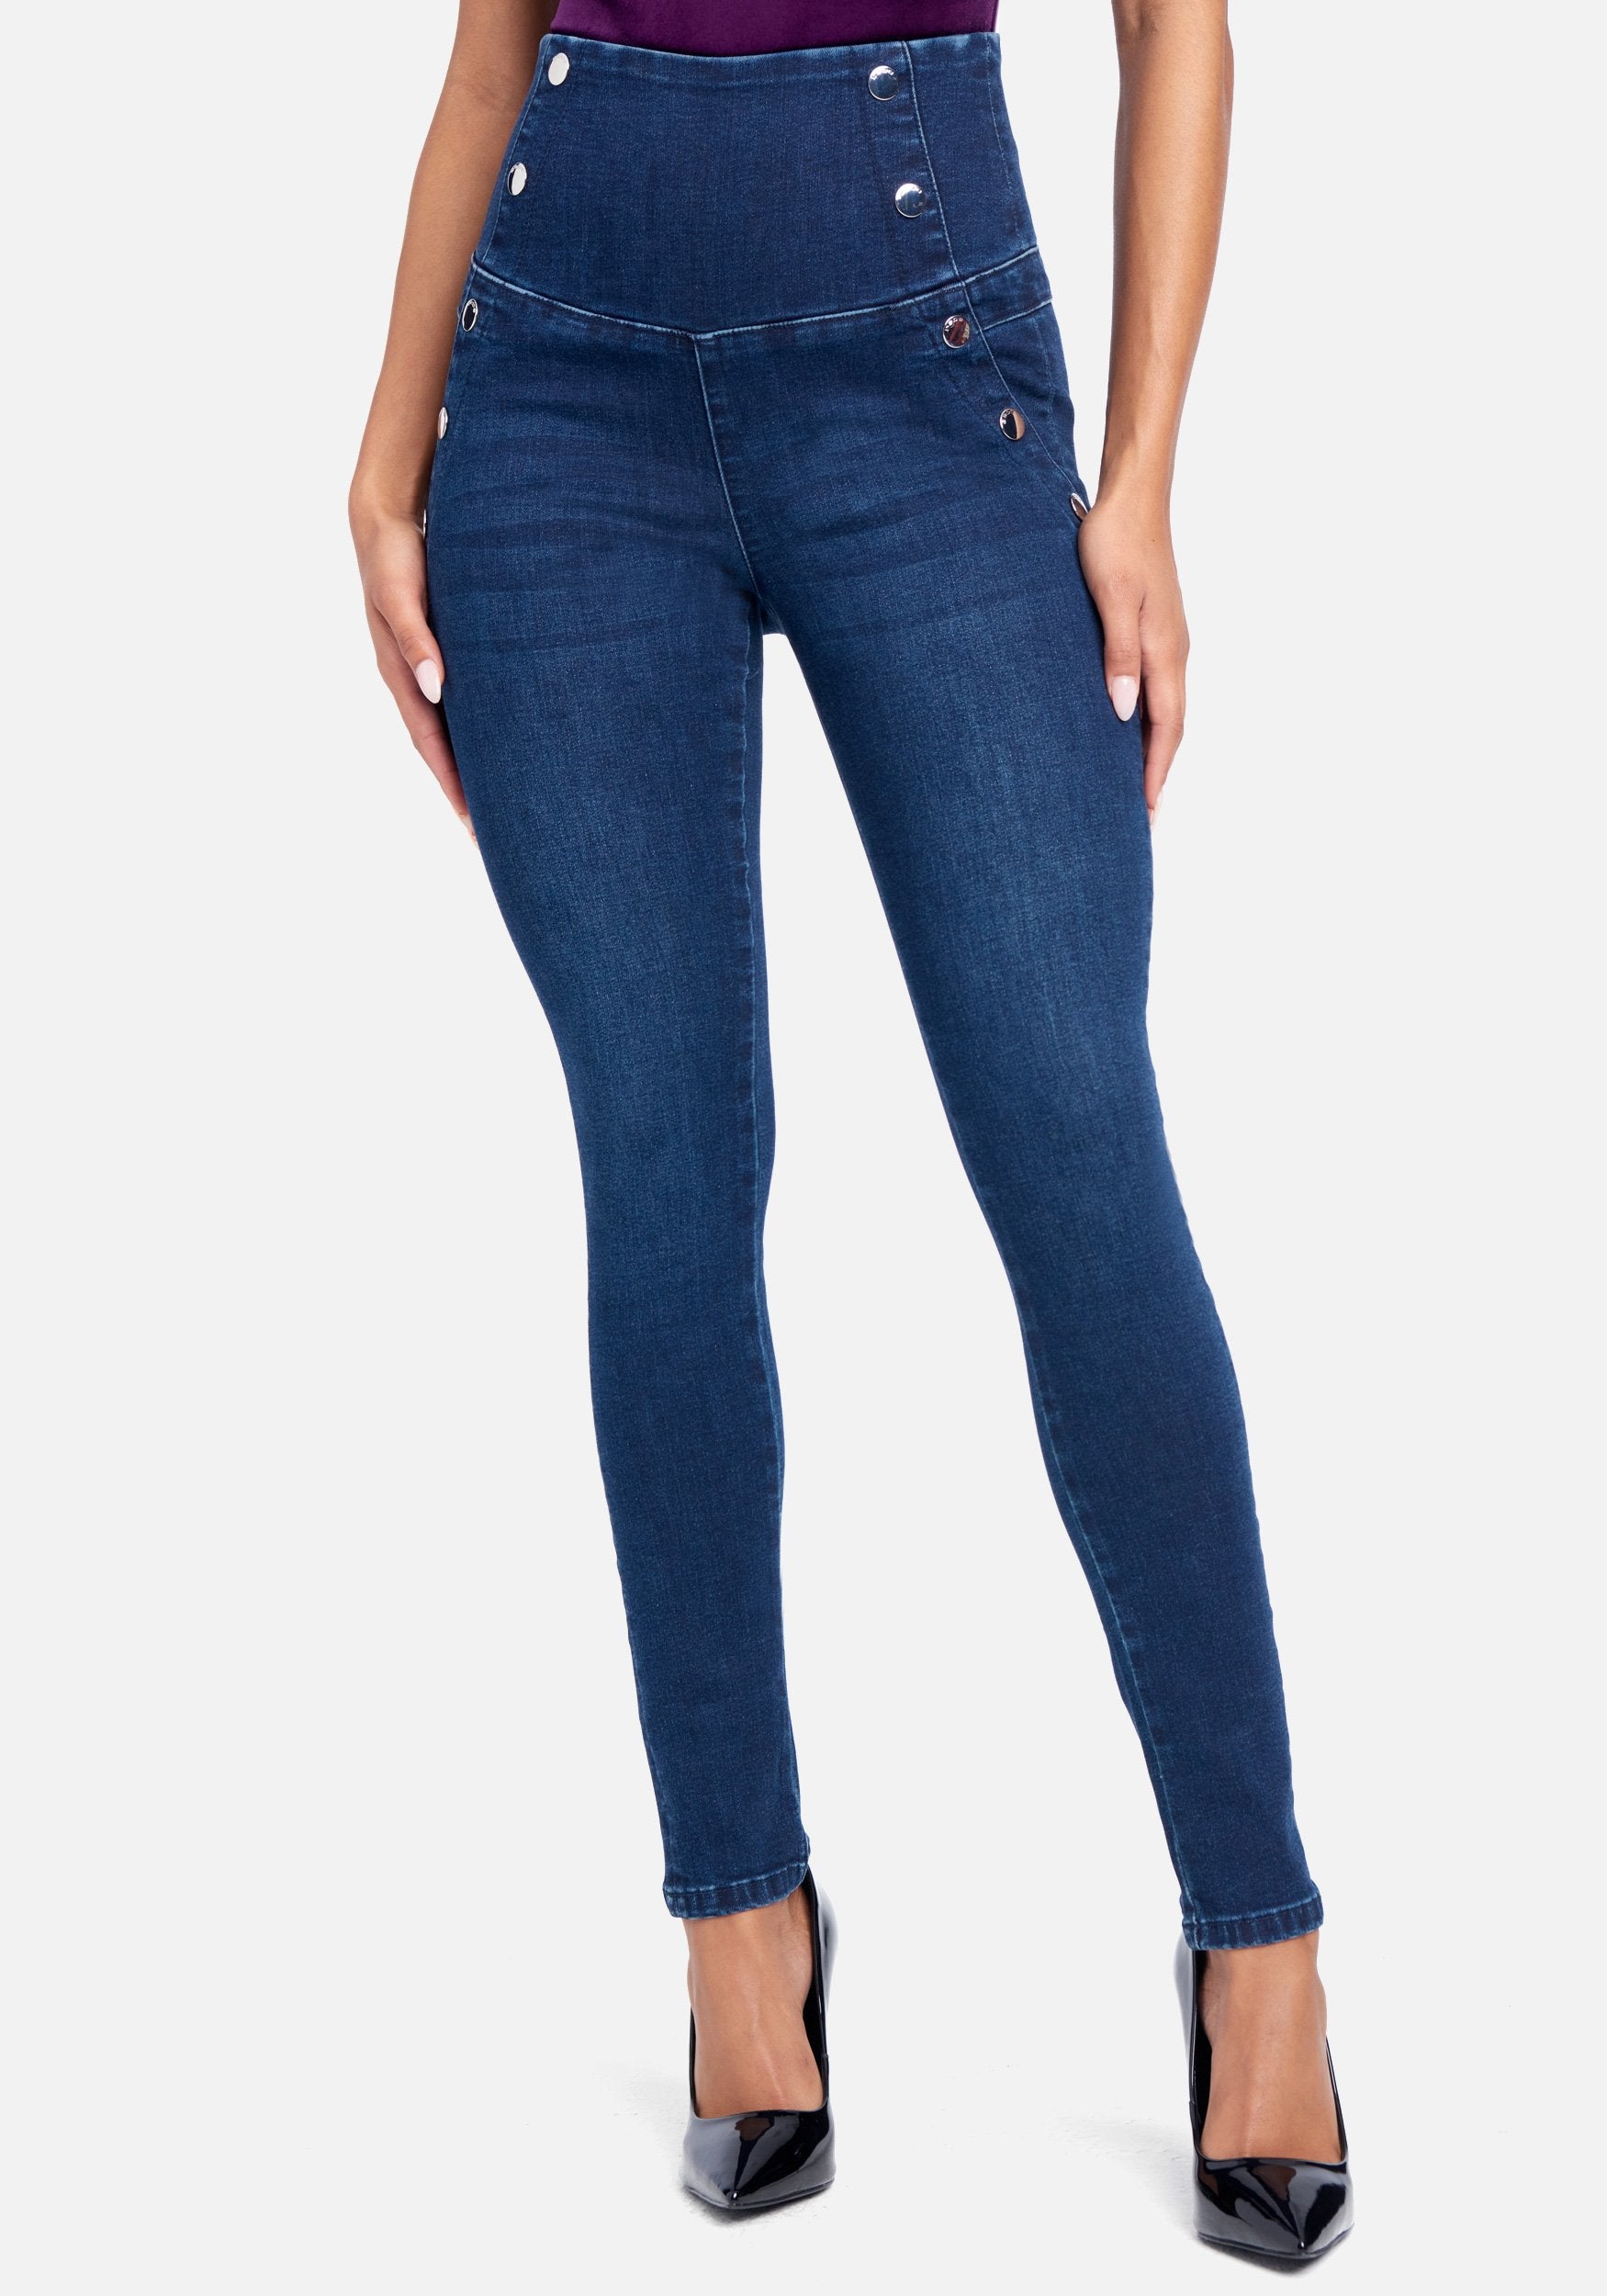  Apparel > Bottoms > Jeans-High Waisted Silver Button Detail Skinny Jeans